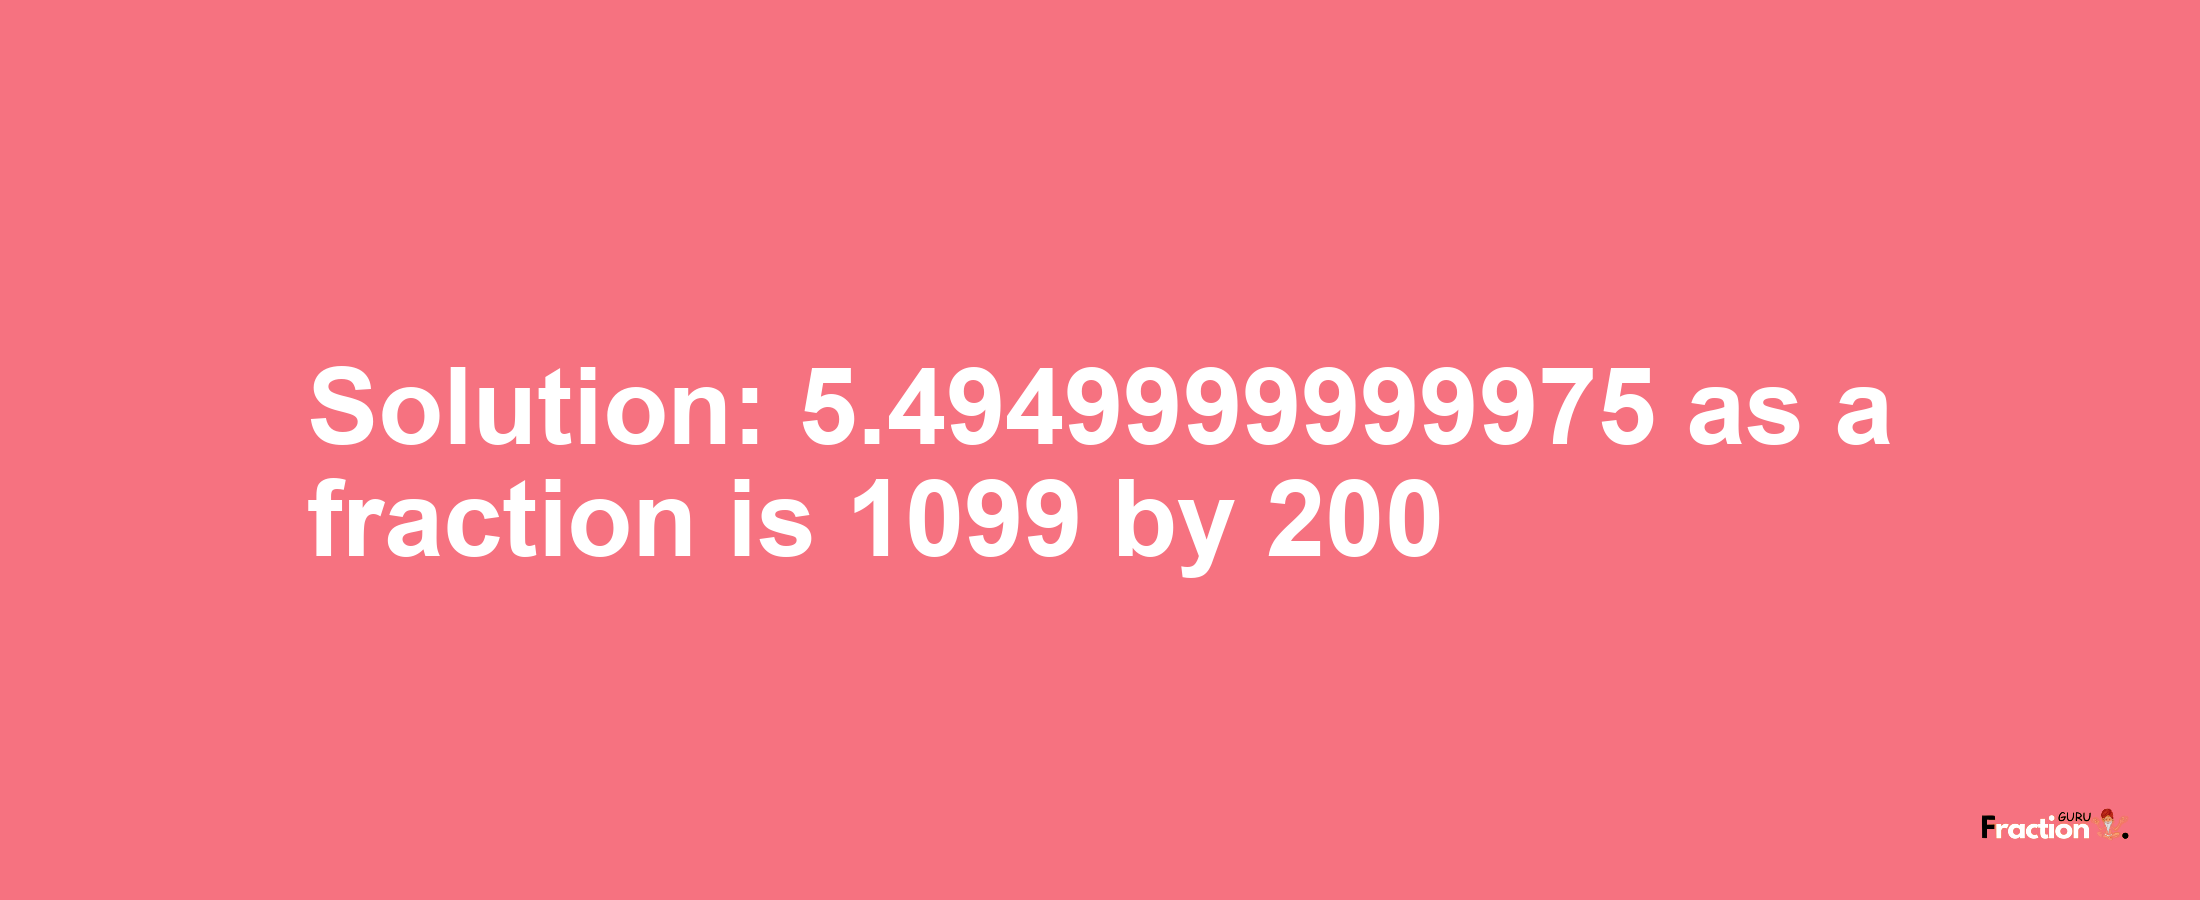 Solution:5.4949999999975 as a fraction is 1099/200